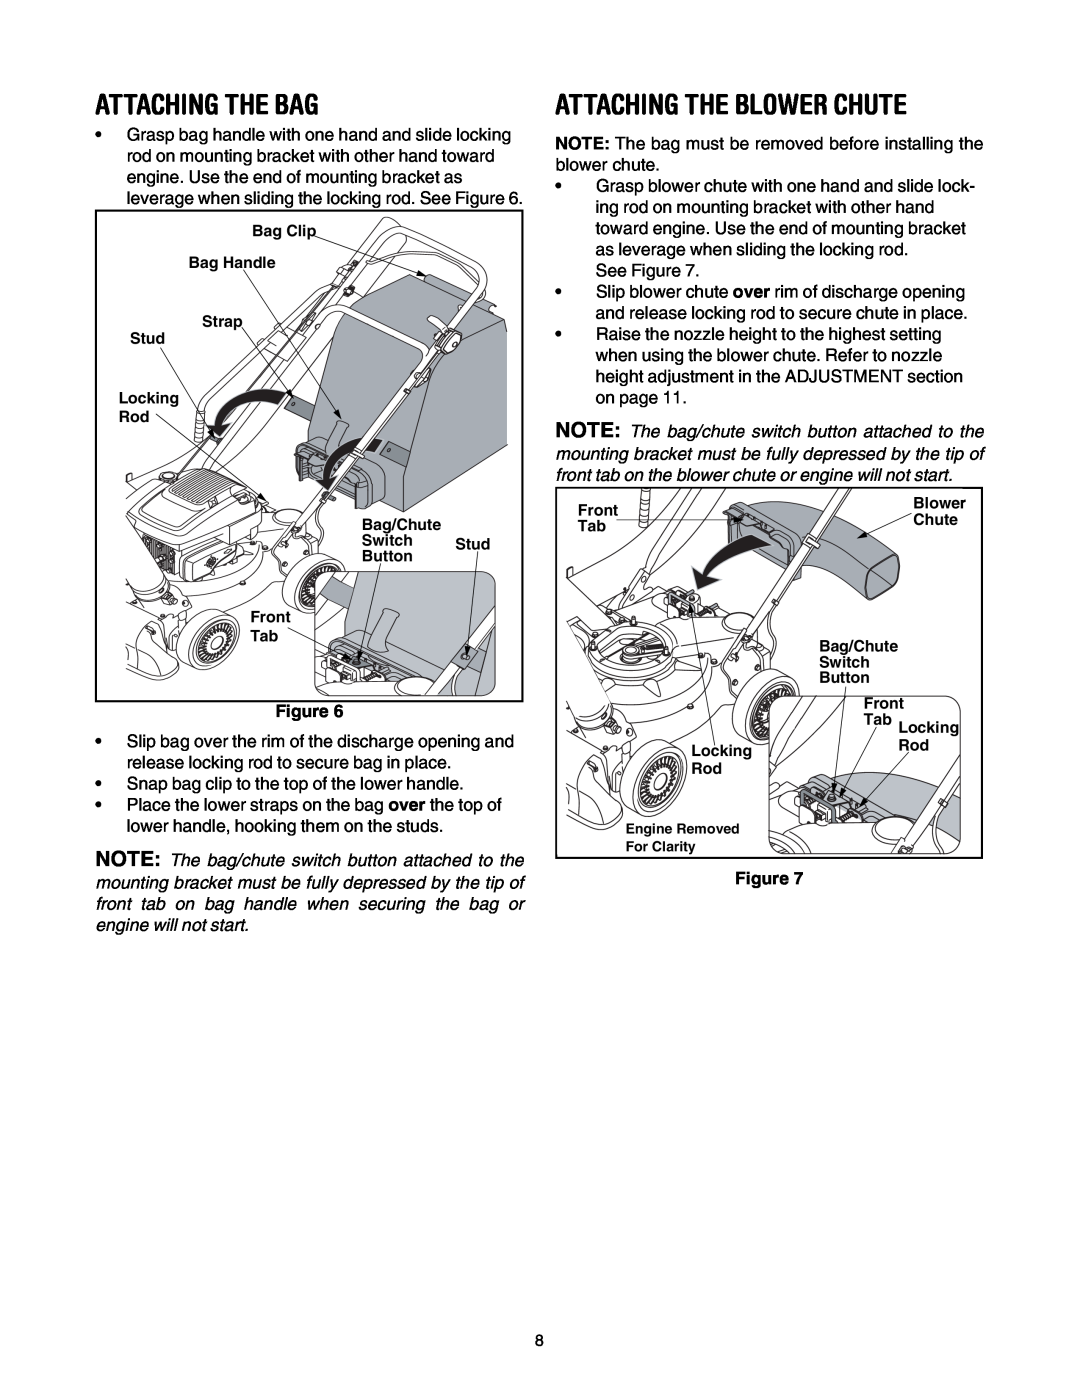 Craftsman 247.77099 operating instructions Attaching The Bag, Attaching The Blower Chute, Figure 